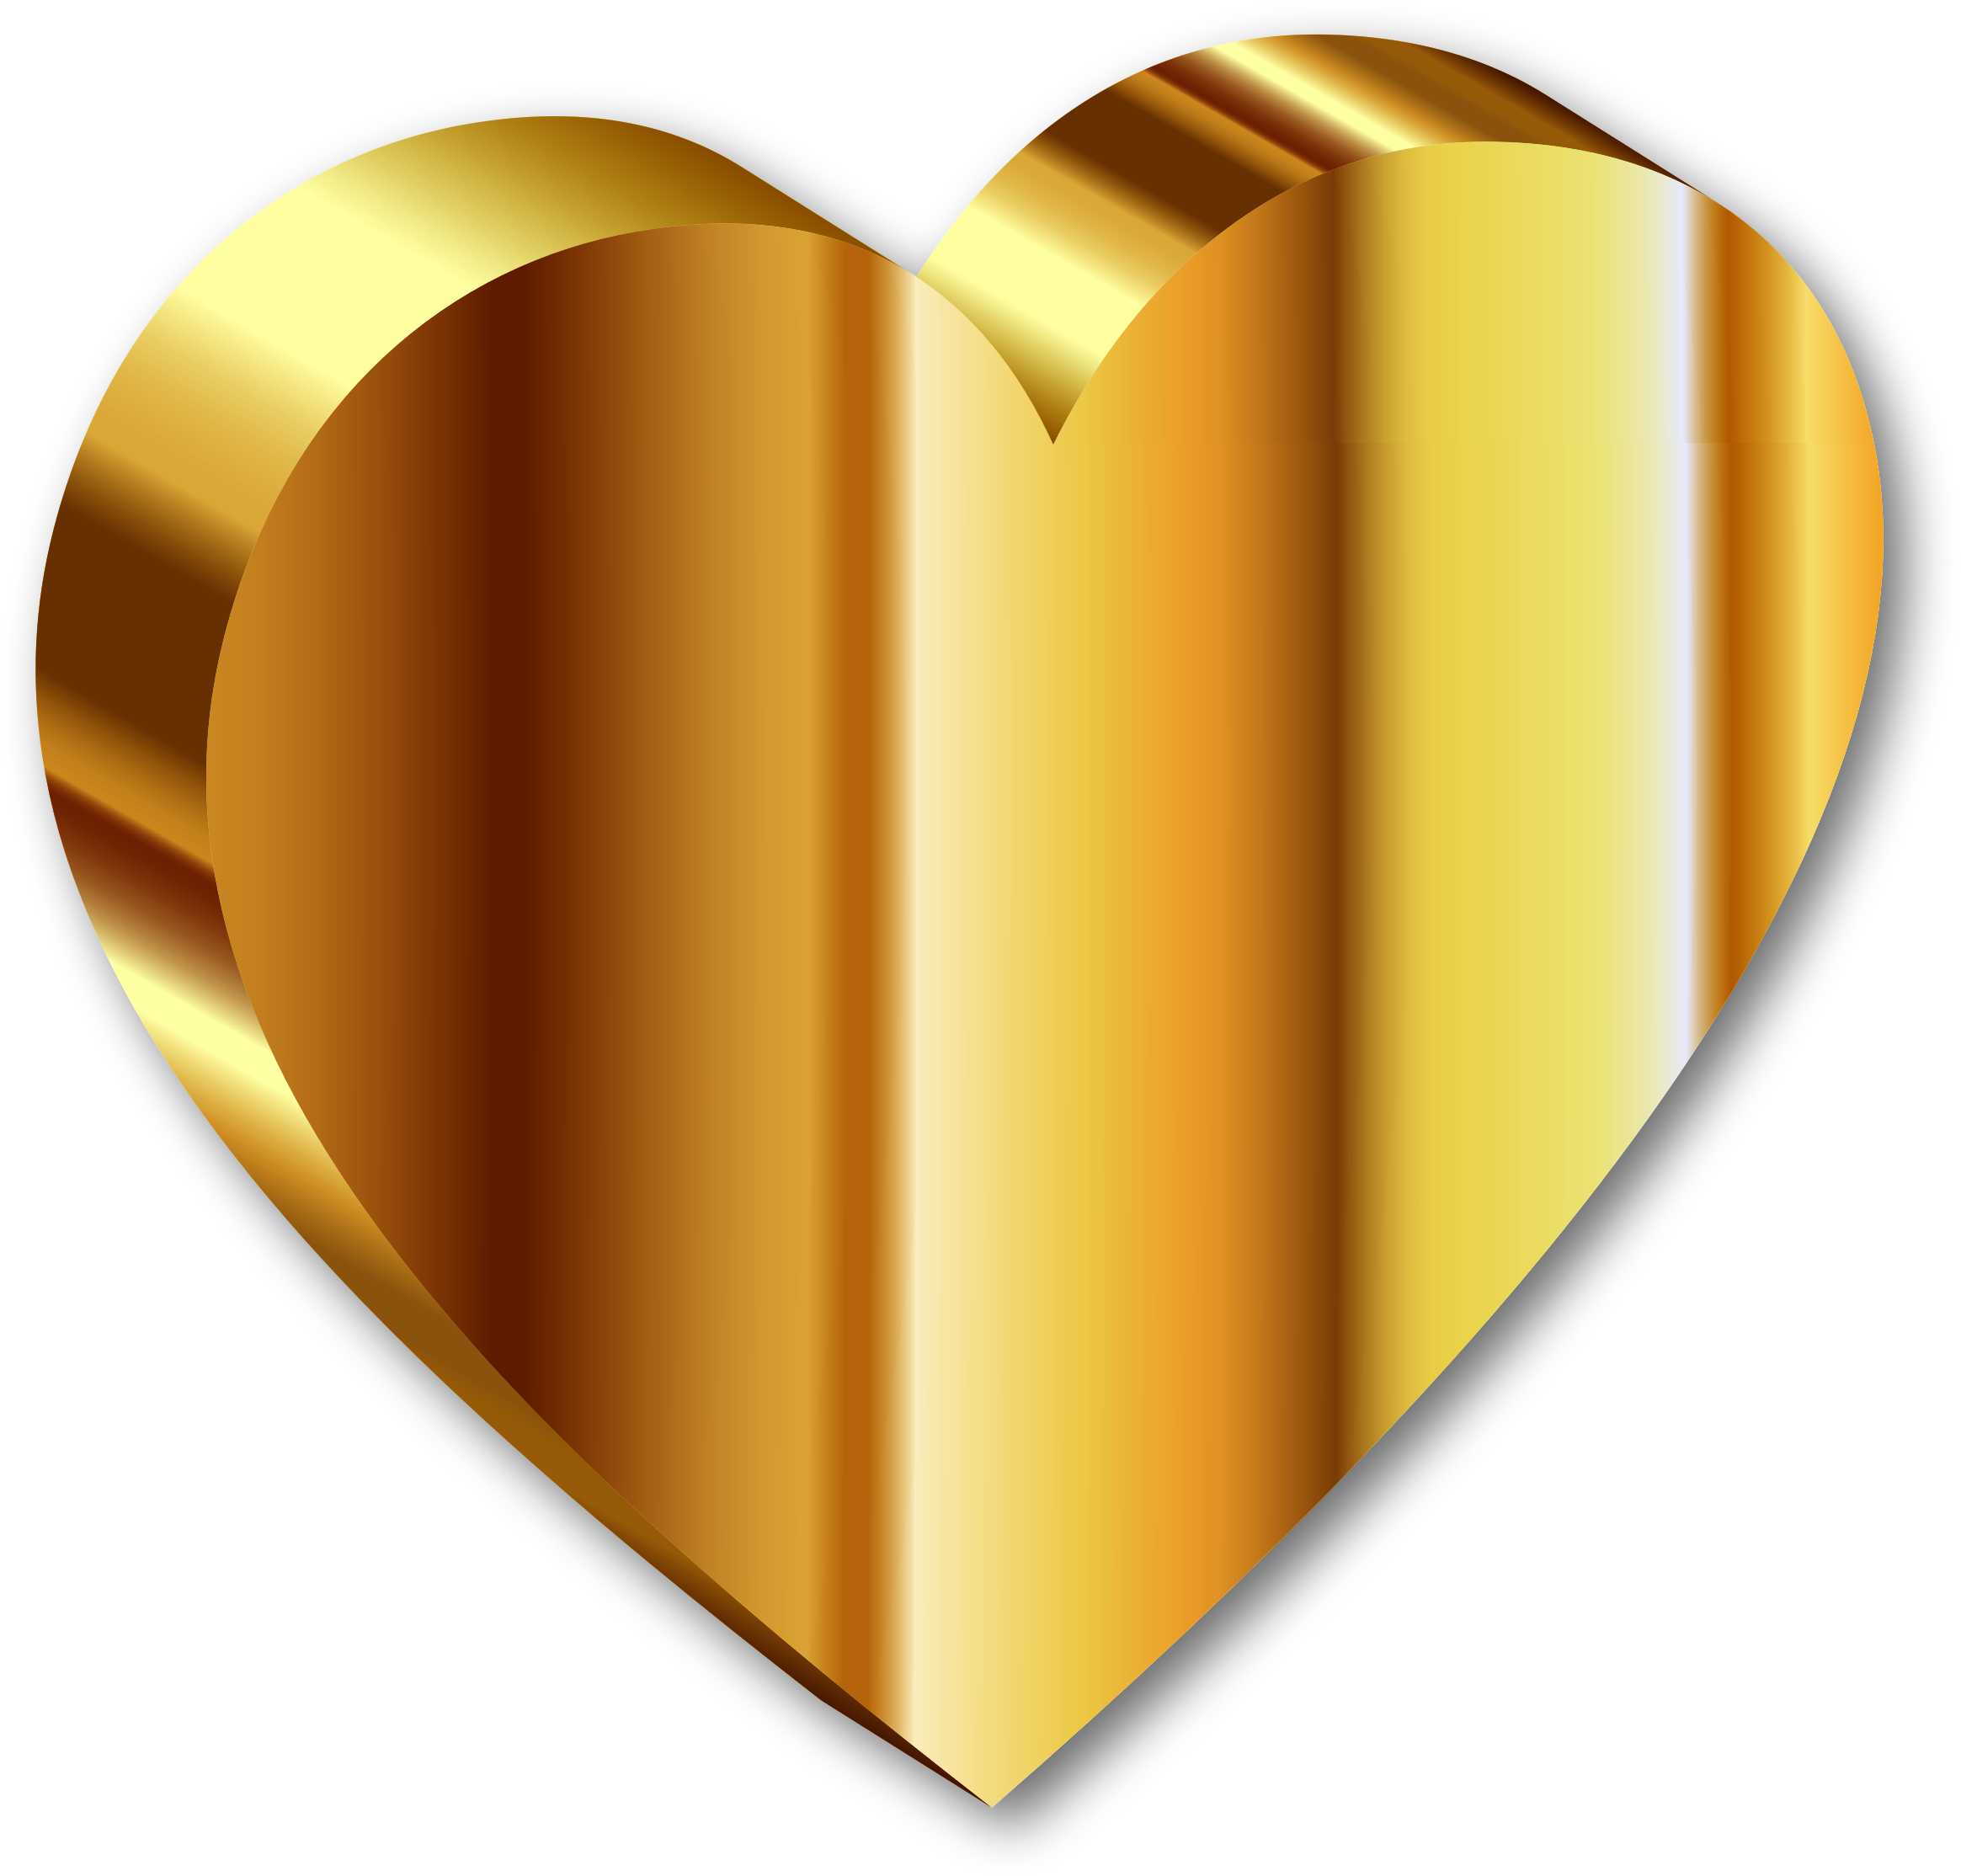 Heart Abstract Gold Free Download Image PNG Image